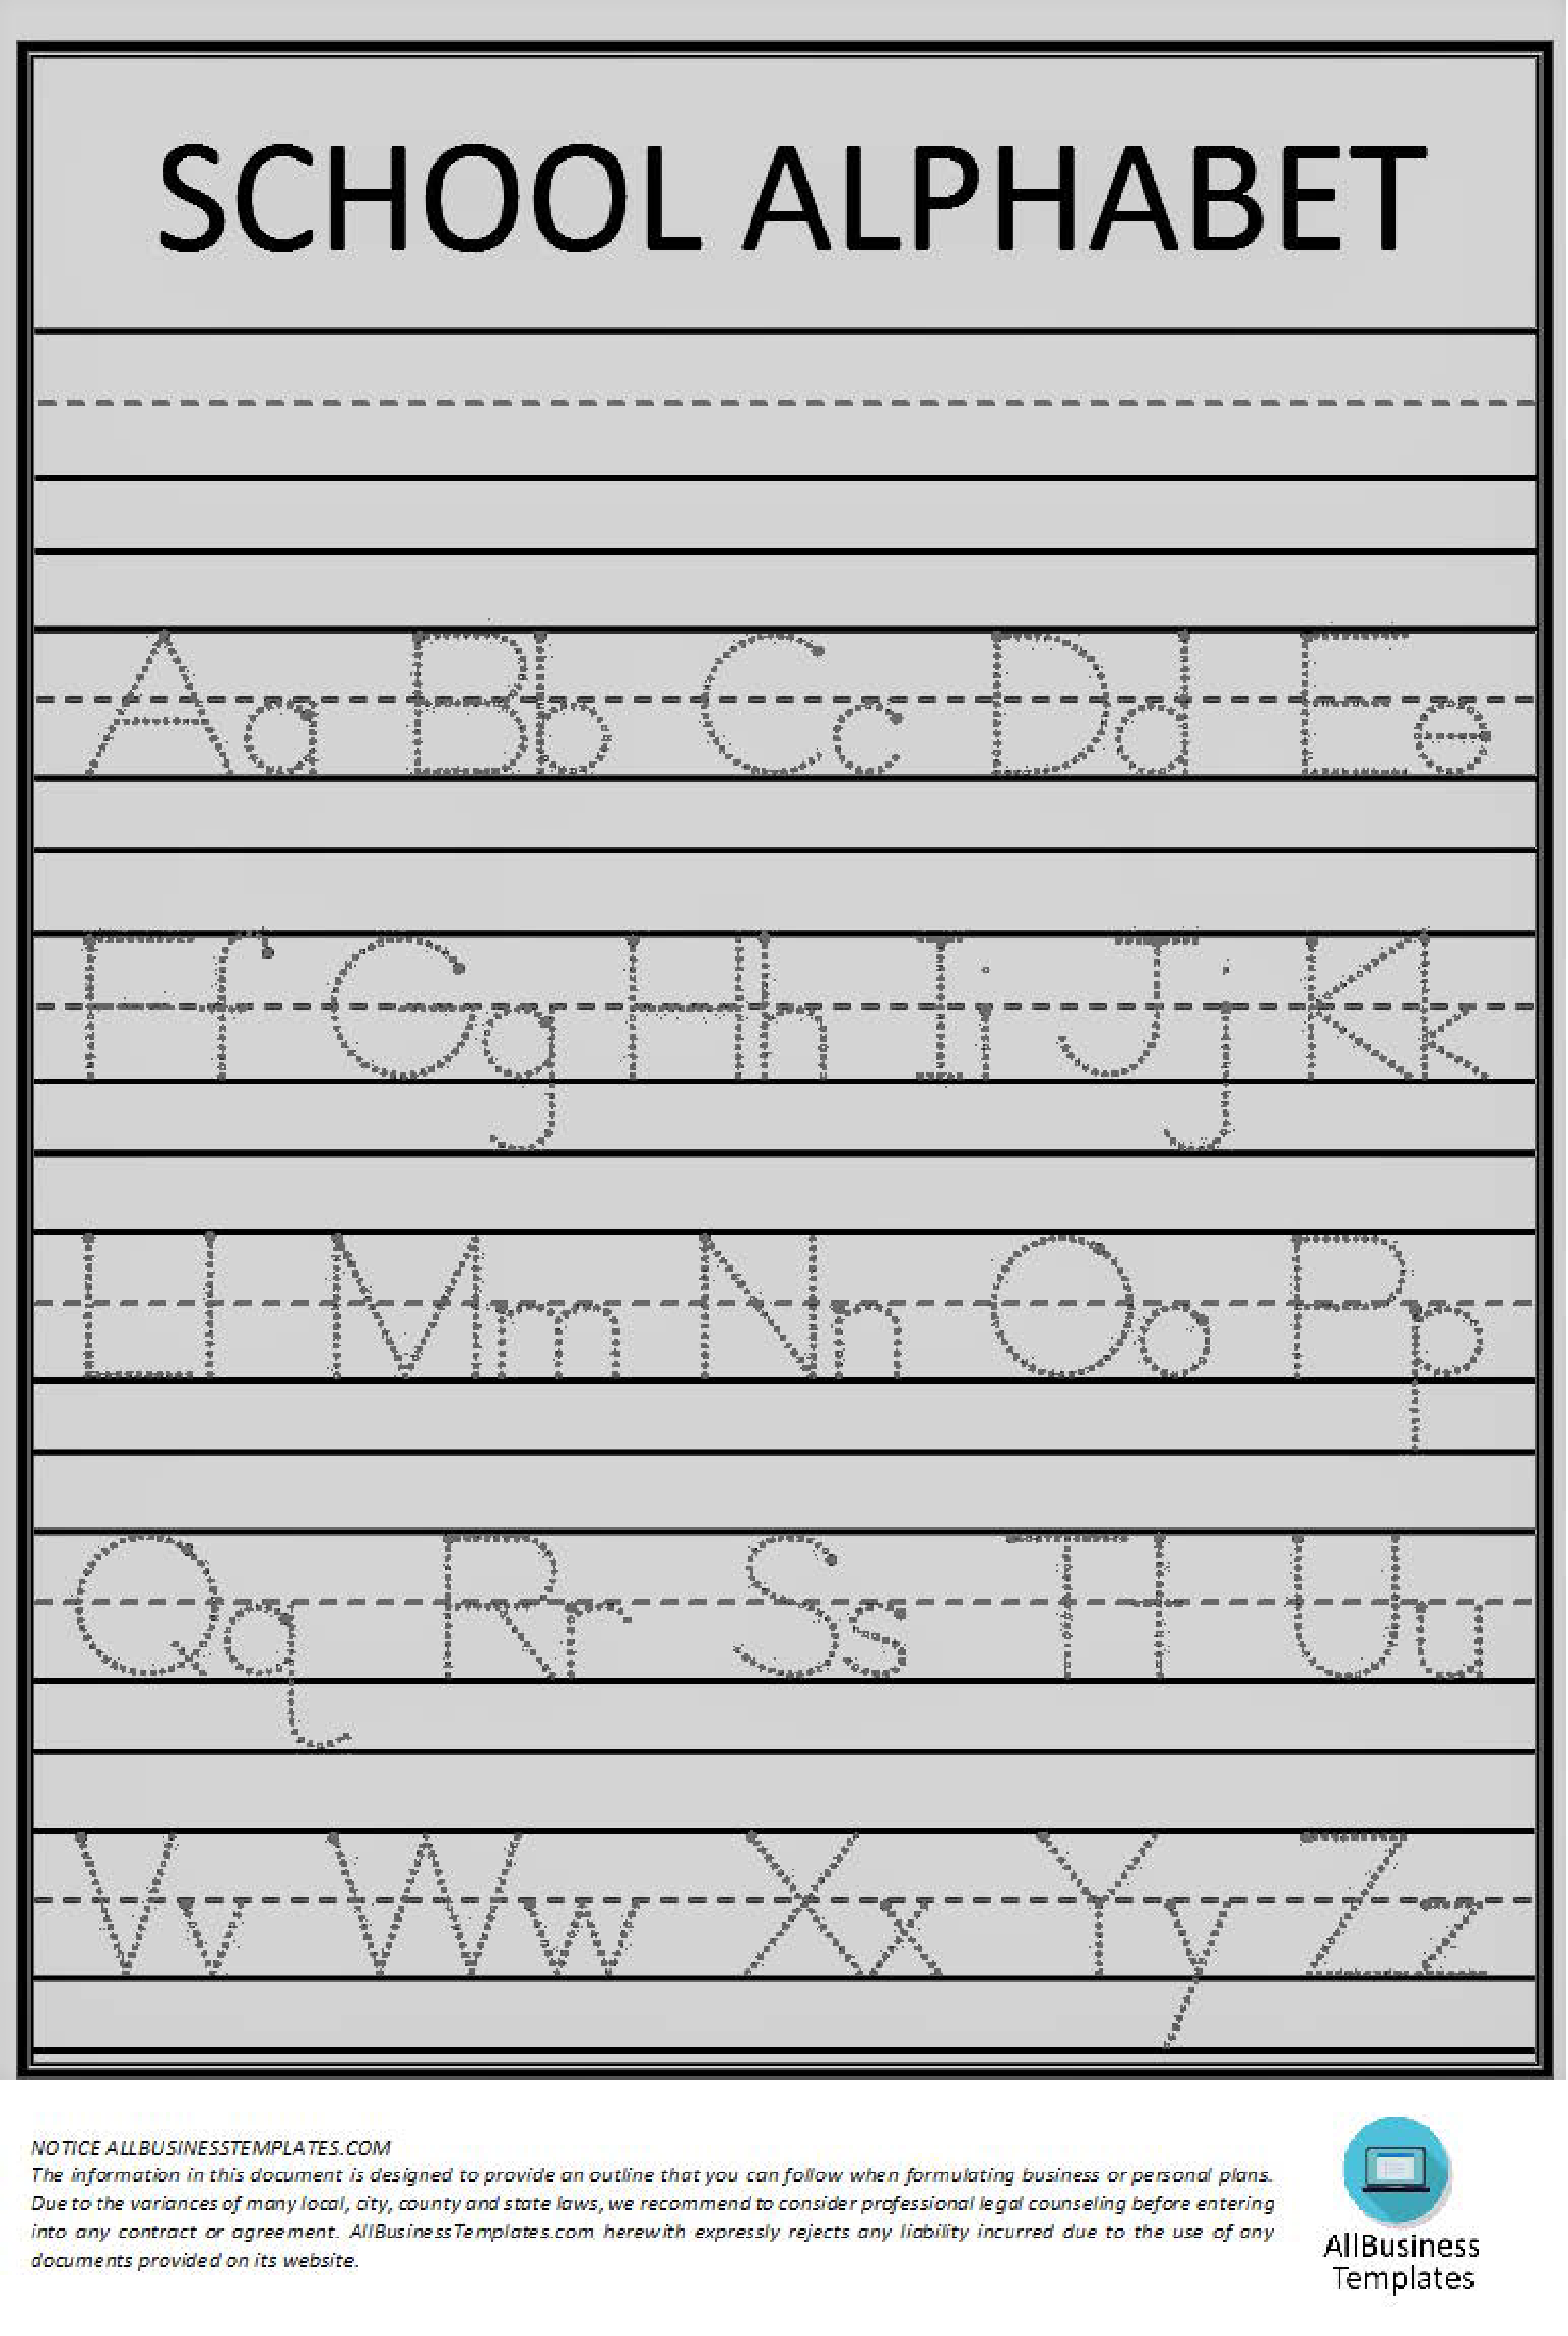 learn-how-to-write-alphabet-preschool-templates-at